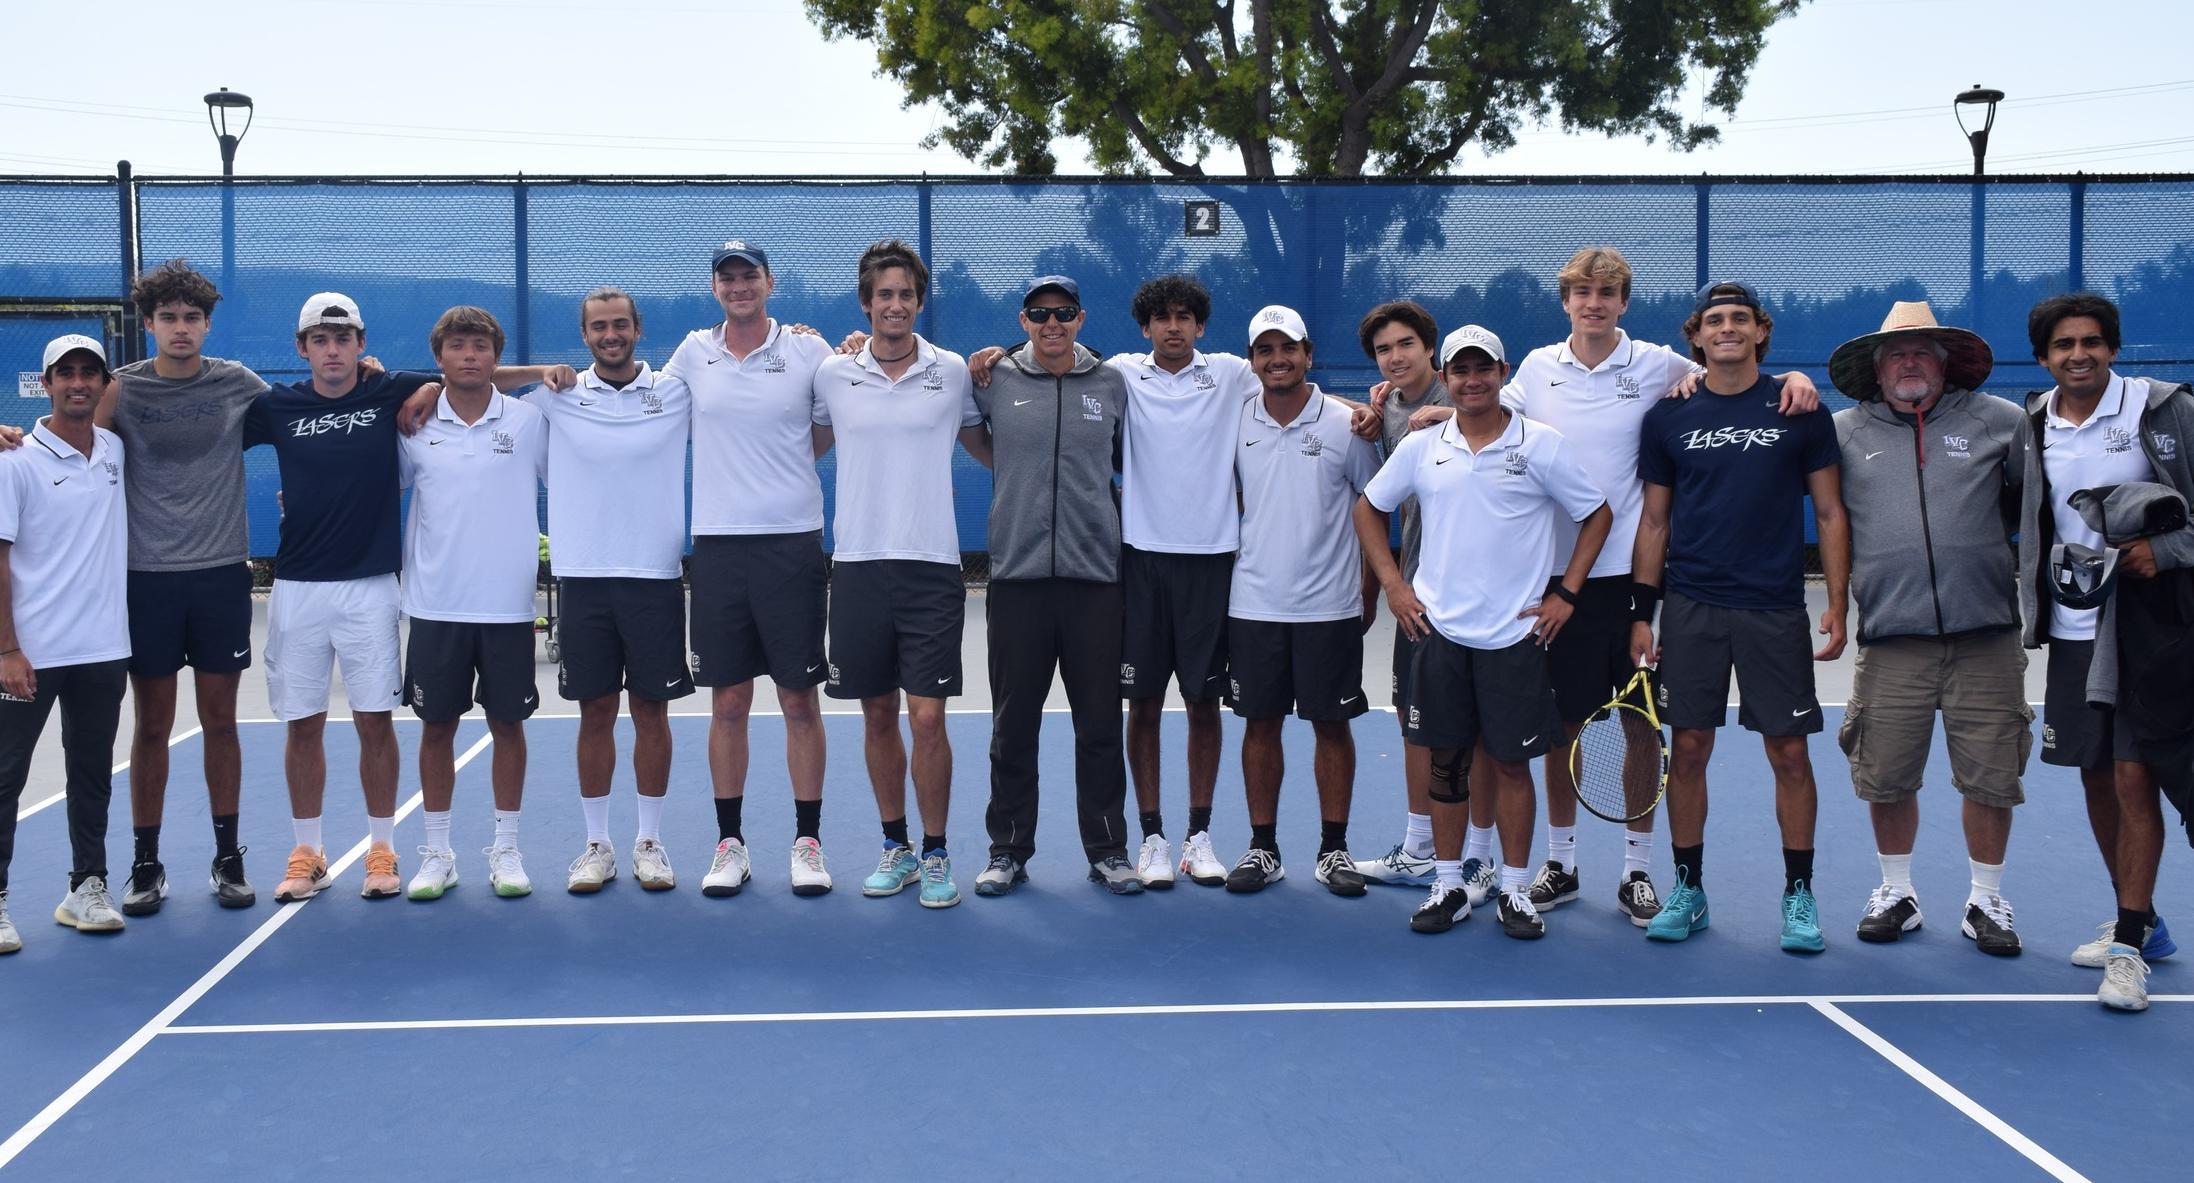 Men's tennis wraps up perfect OEC season with 9-0 victory